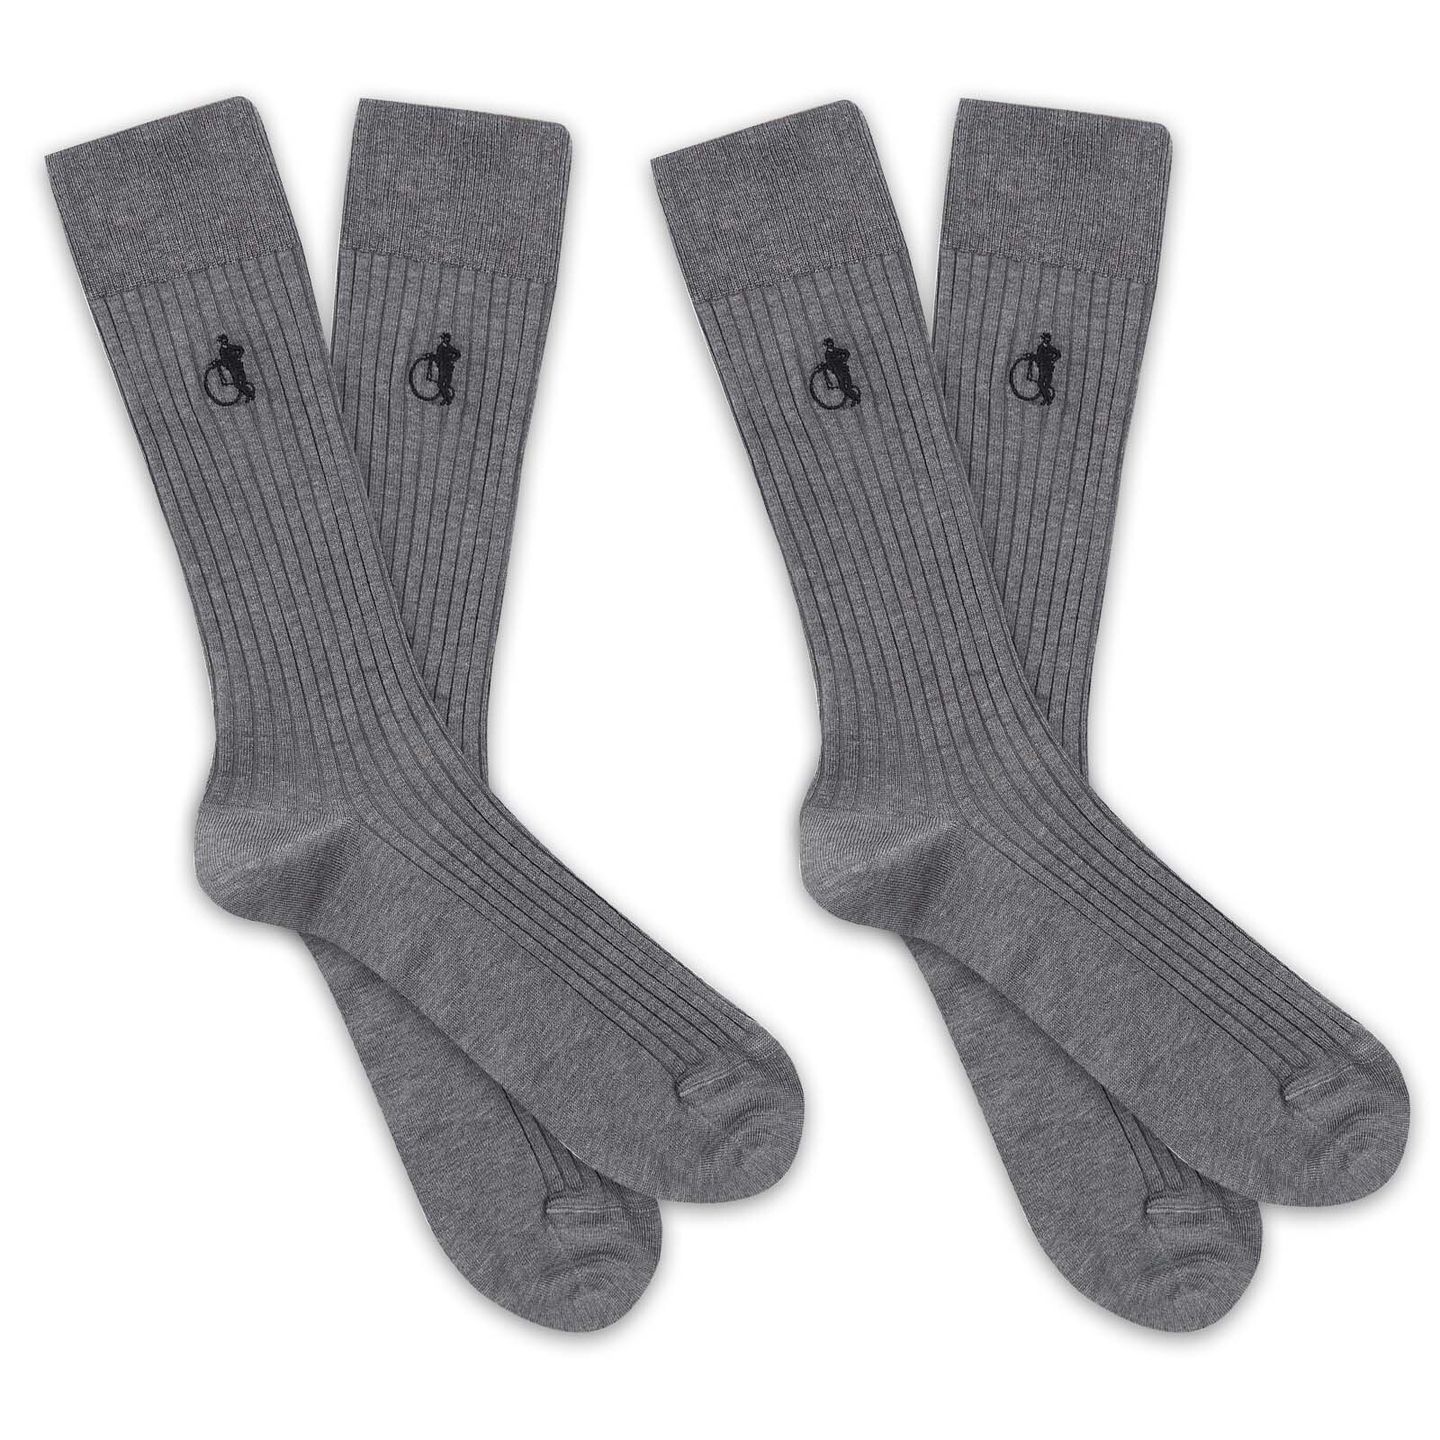 2 pairs of grey sartorial socks with a black LSC embroidered logo